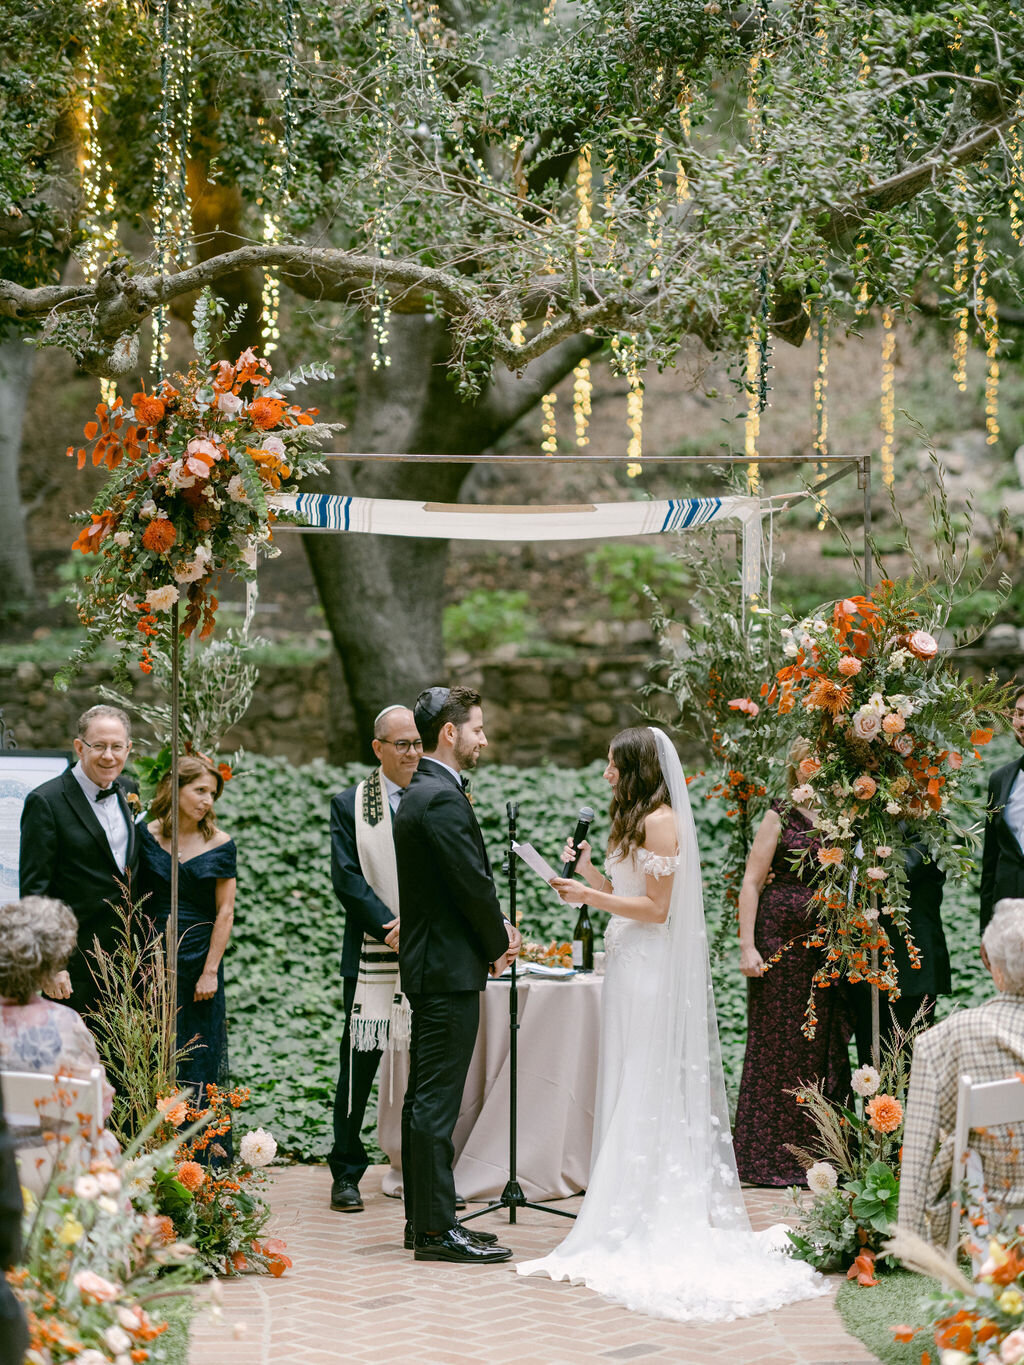 bride and groom under chuppah and tree of lights